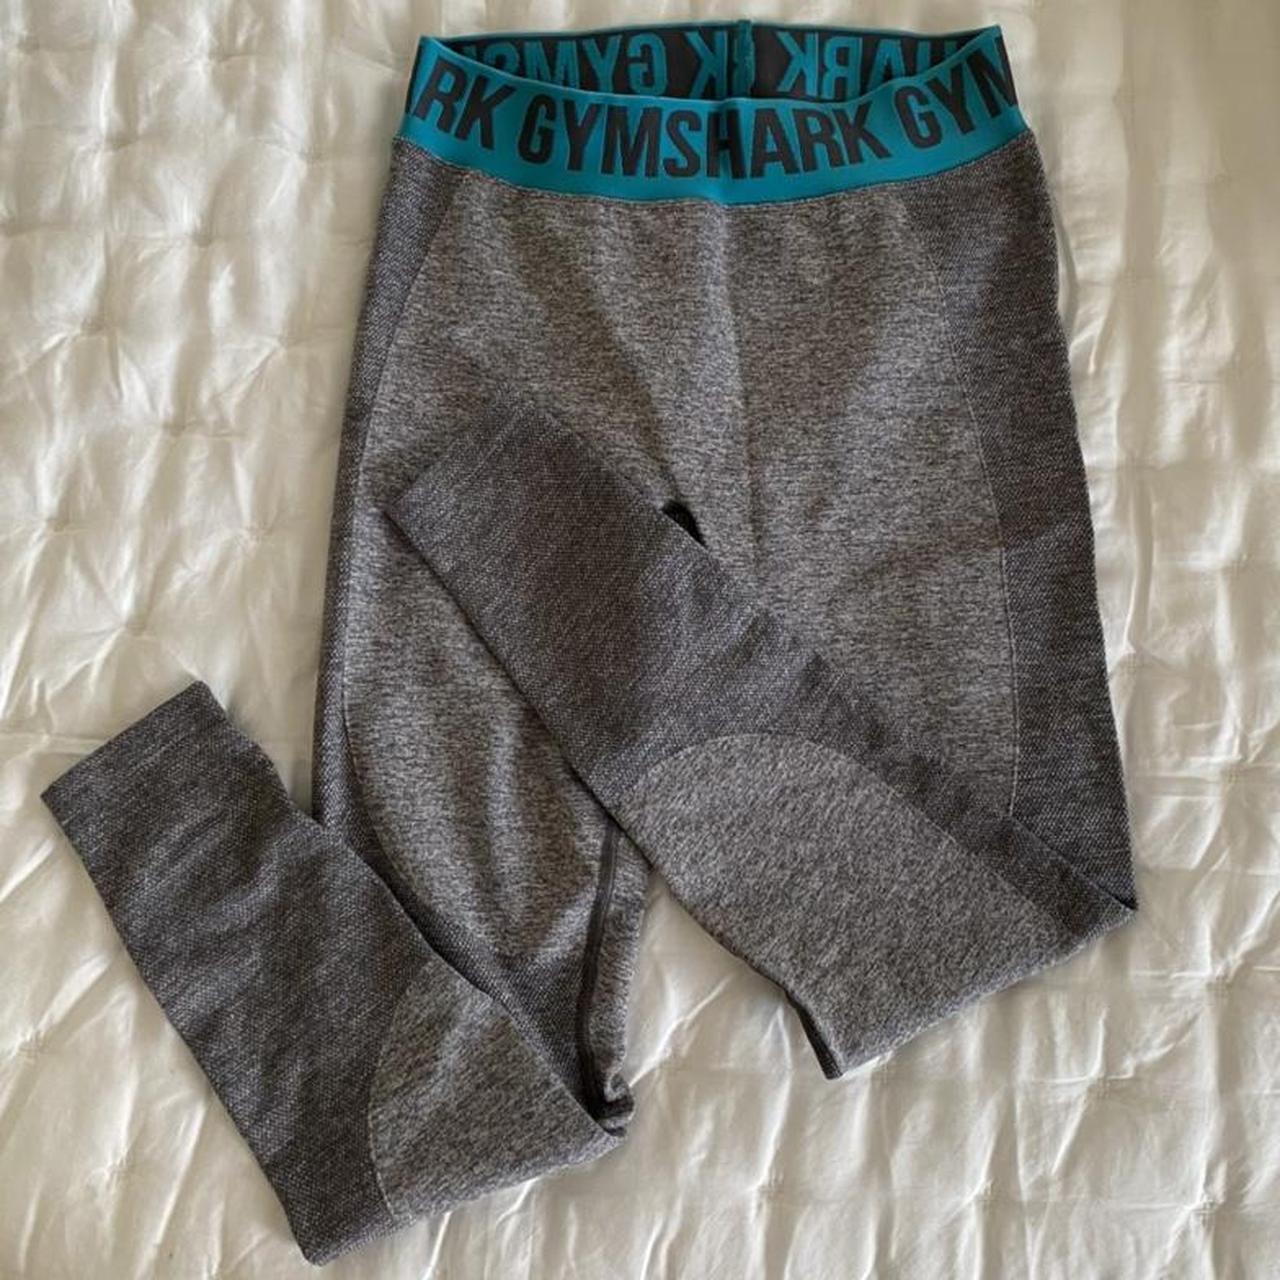 Gymshark leggings, worn once, in perfect condition - Depop